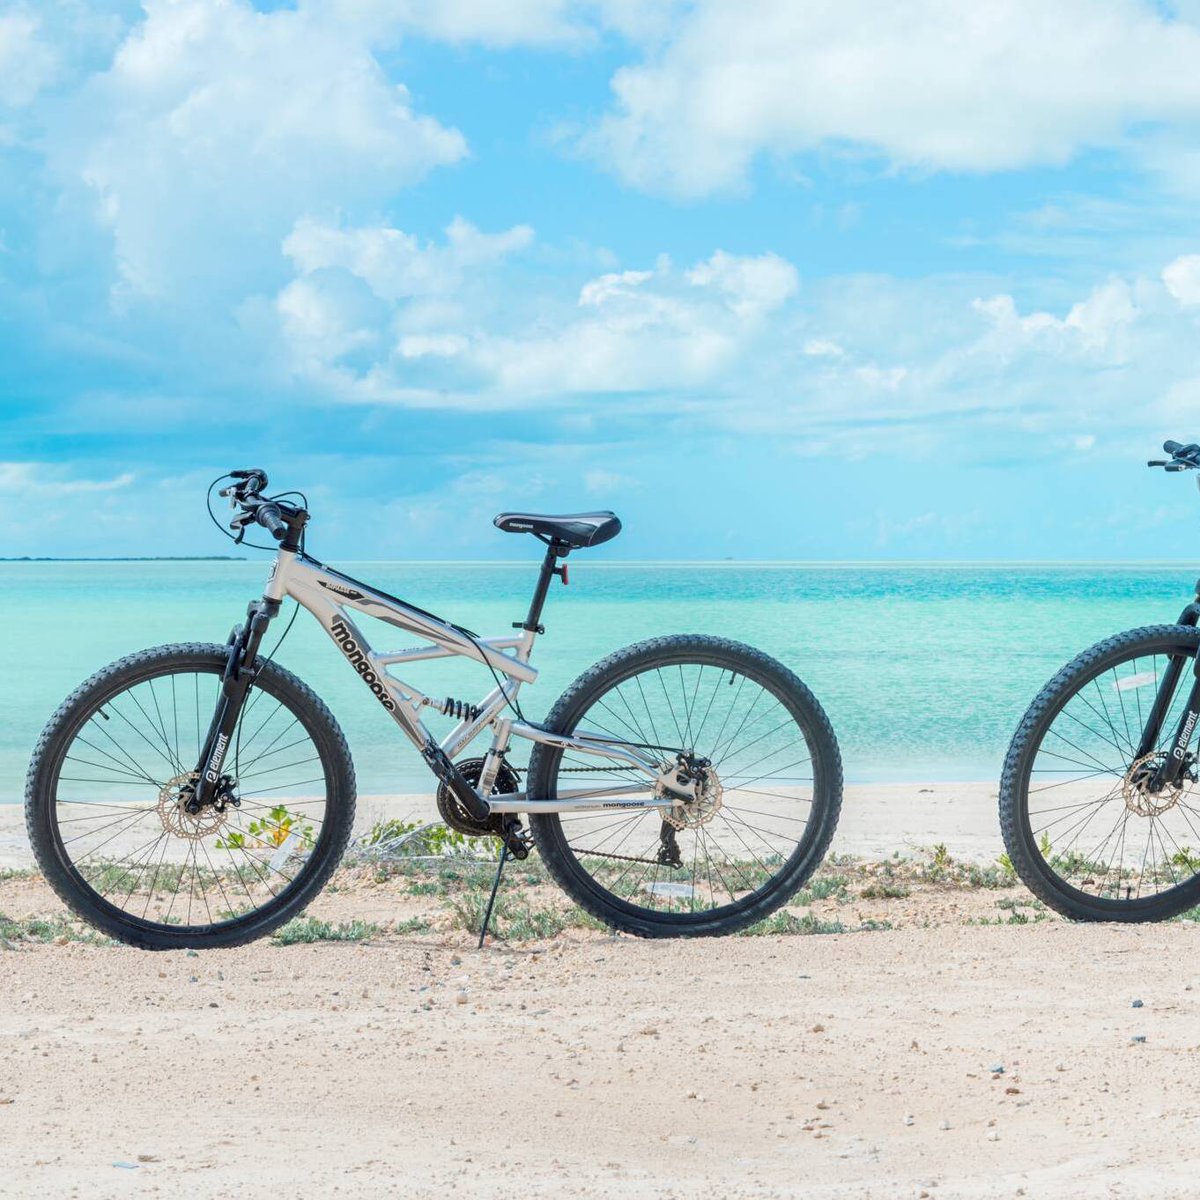 Exploring Turks & Caicos by bike? Yes please. 🚴🏽 Check out our cycling map of routes around Providenciales: visittci.com/providenciales… 📍 South Caicos